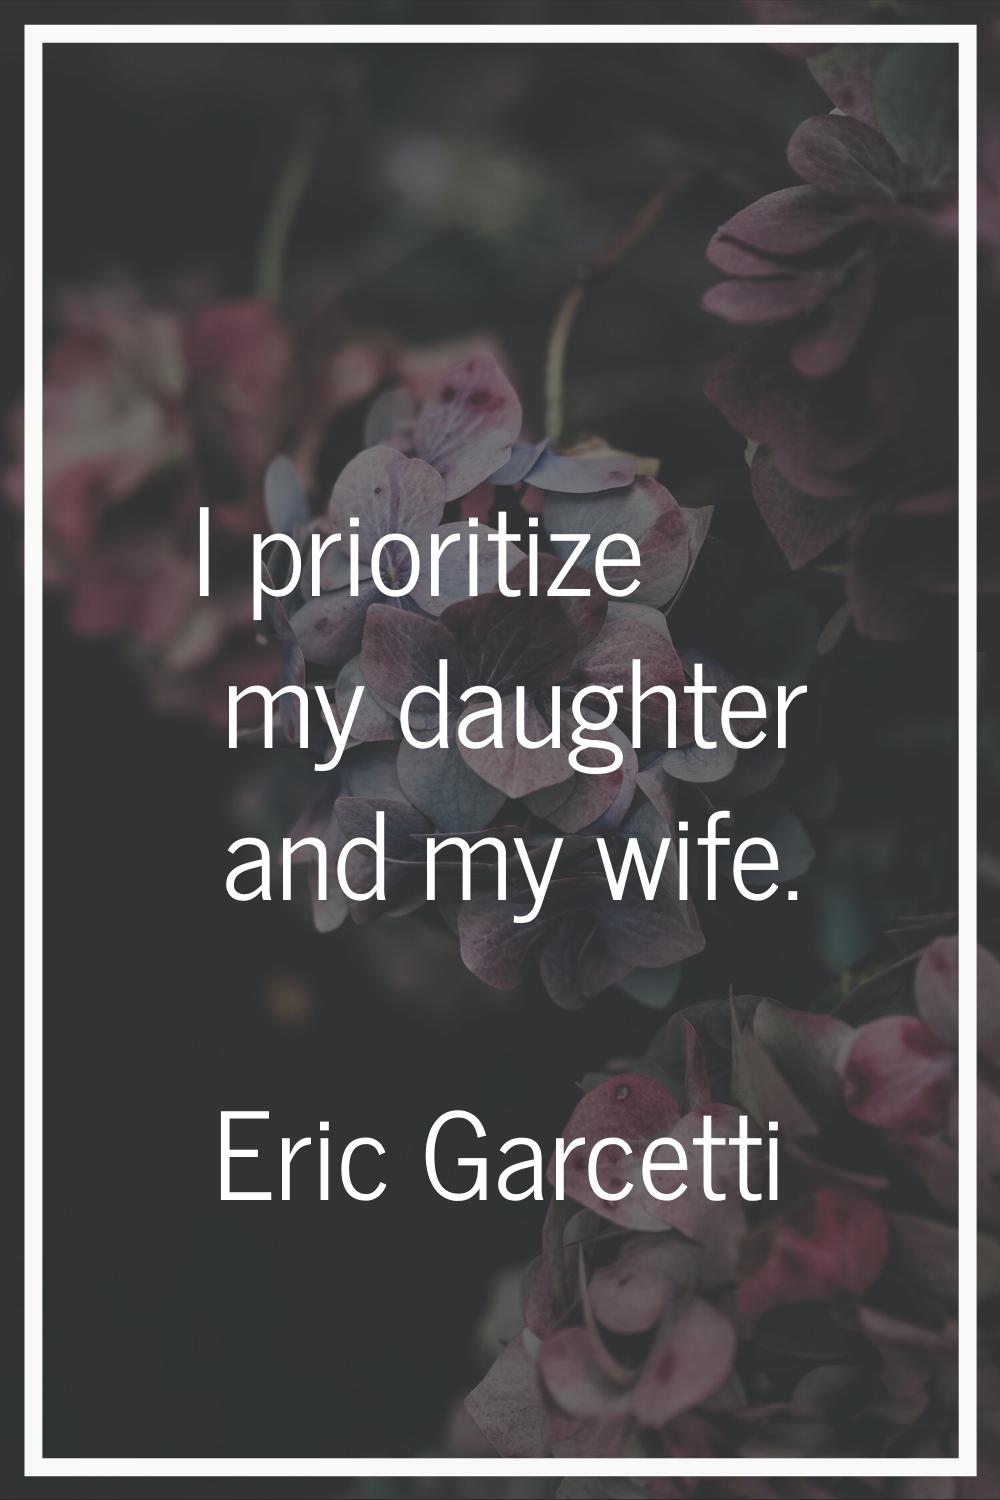 I prioritize my daughter and my wife.